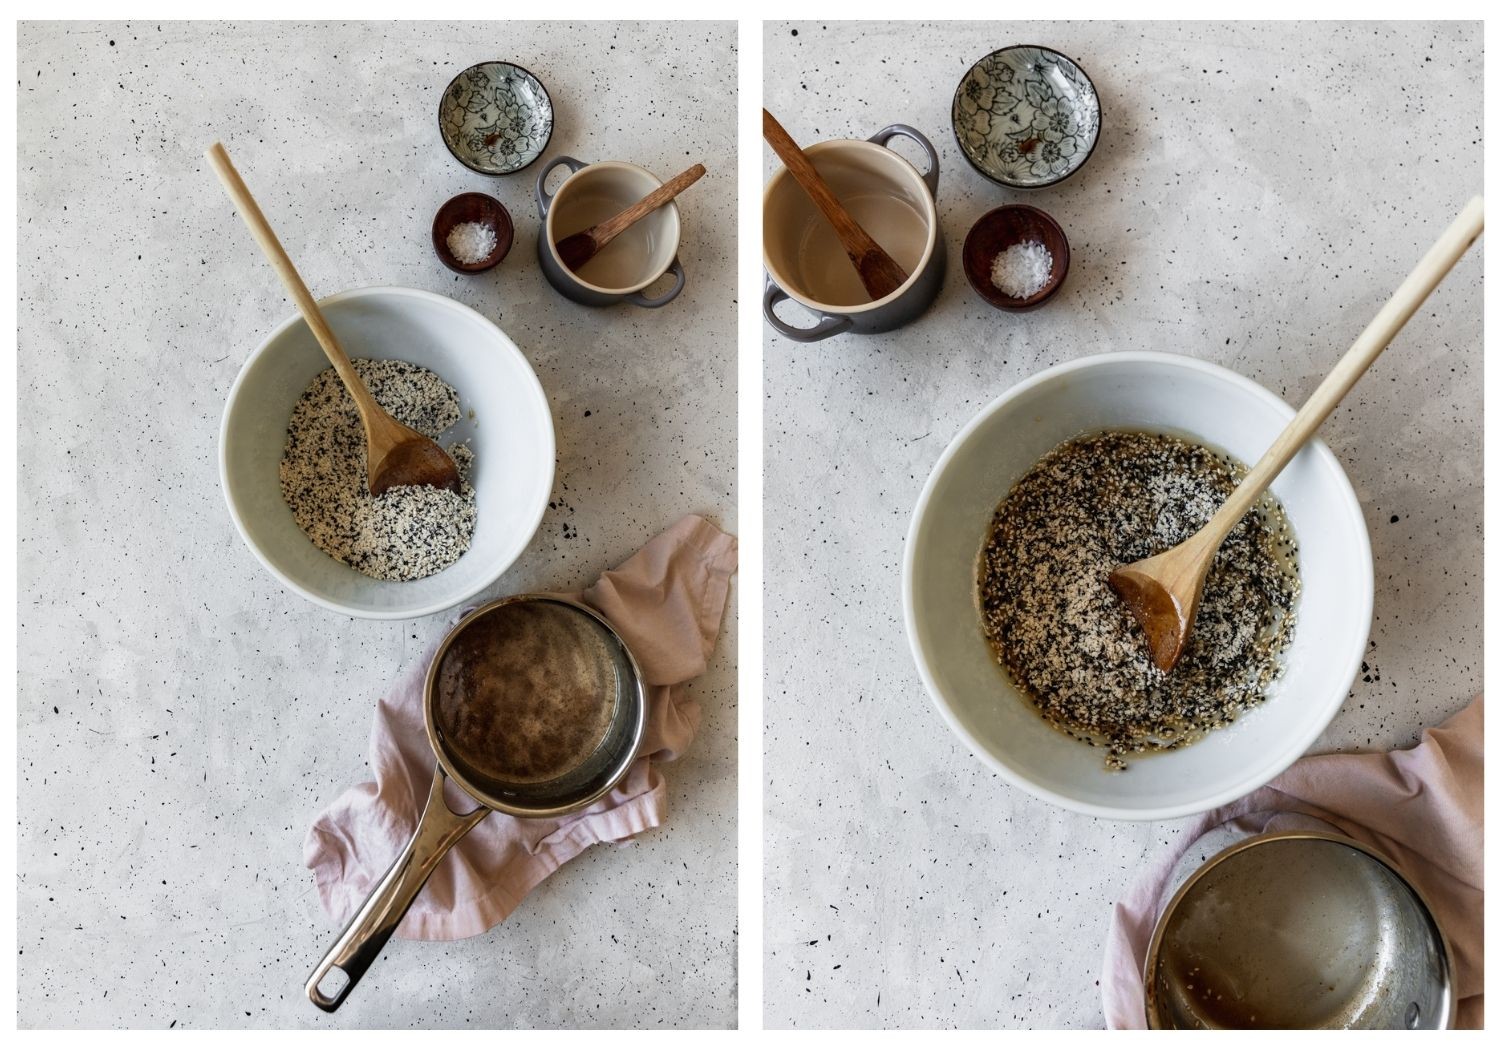 Two bird's eye images; on the left, a bowl is filled with dry cookie ingredients next to a saucepan of caramel. On the right is a bowl filled with sesame cookie dough.